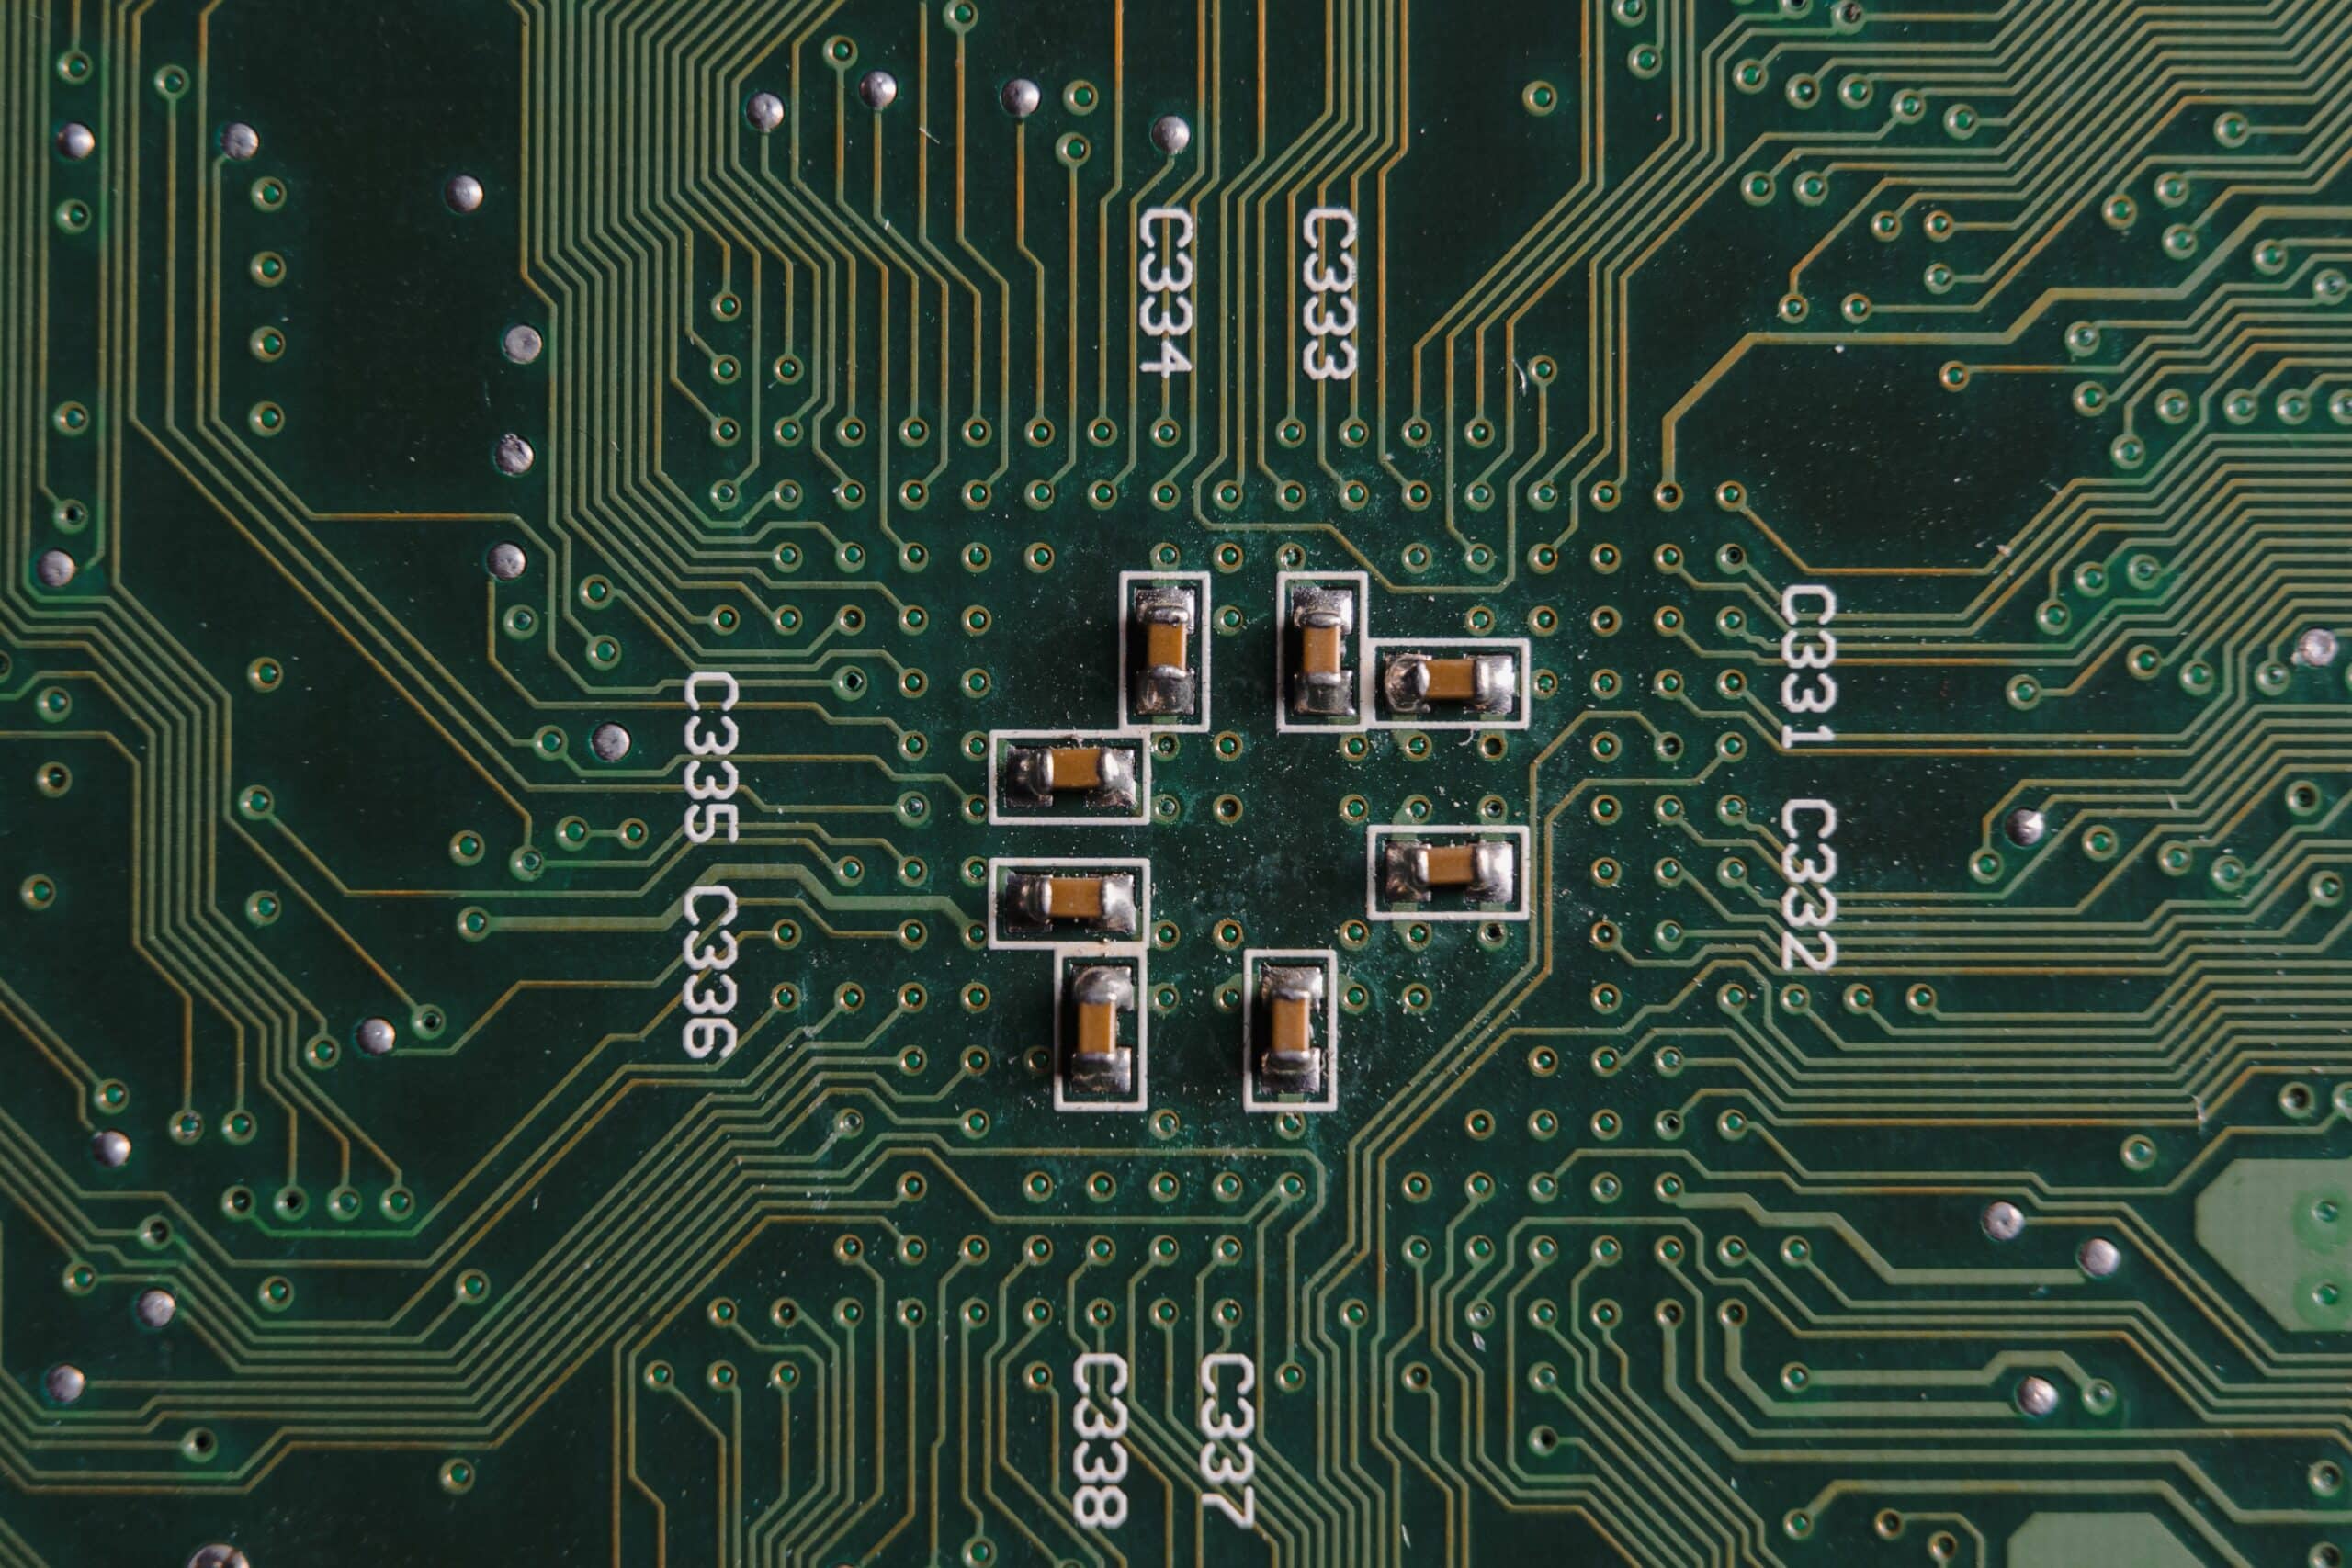 What's the Difference Between PCB Potting and Conformal Coating